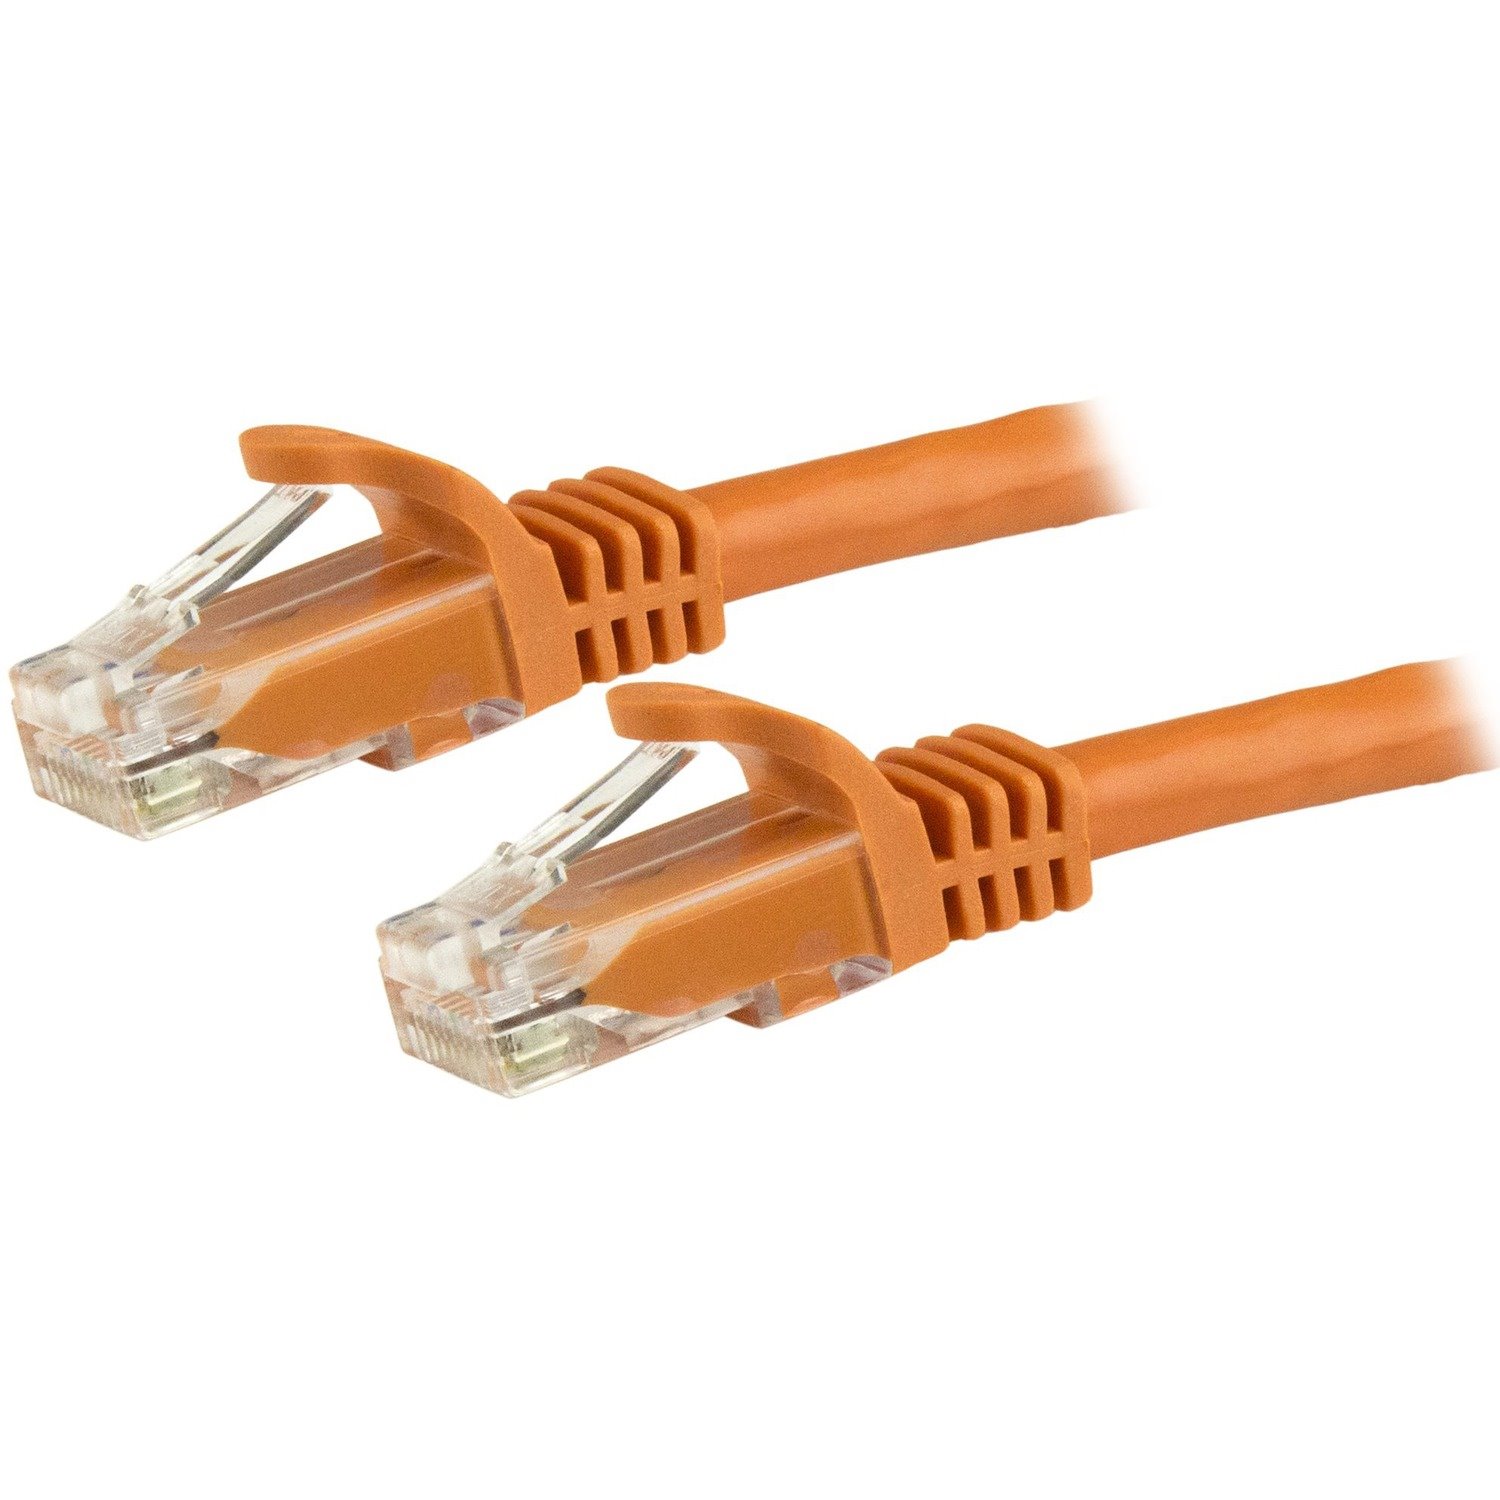 StarTech.com 5 m Category 6 Network Cable for Network Device, Workstation, Wall Outlet, Security Device, Distribution Panel, VoIP Device, Hub - 1